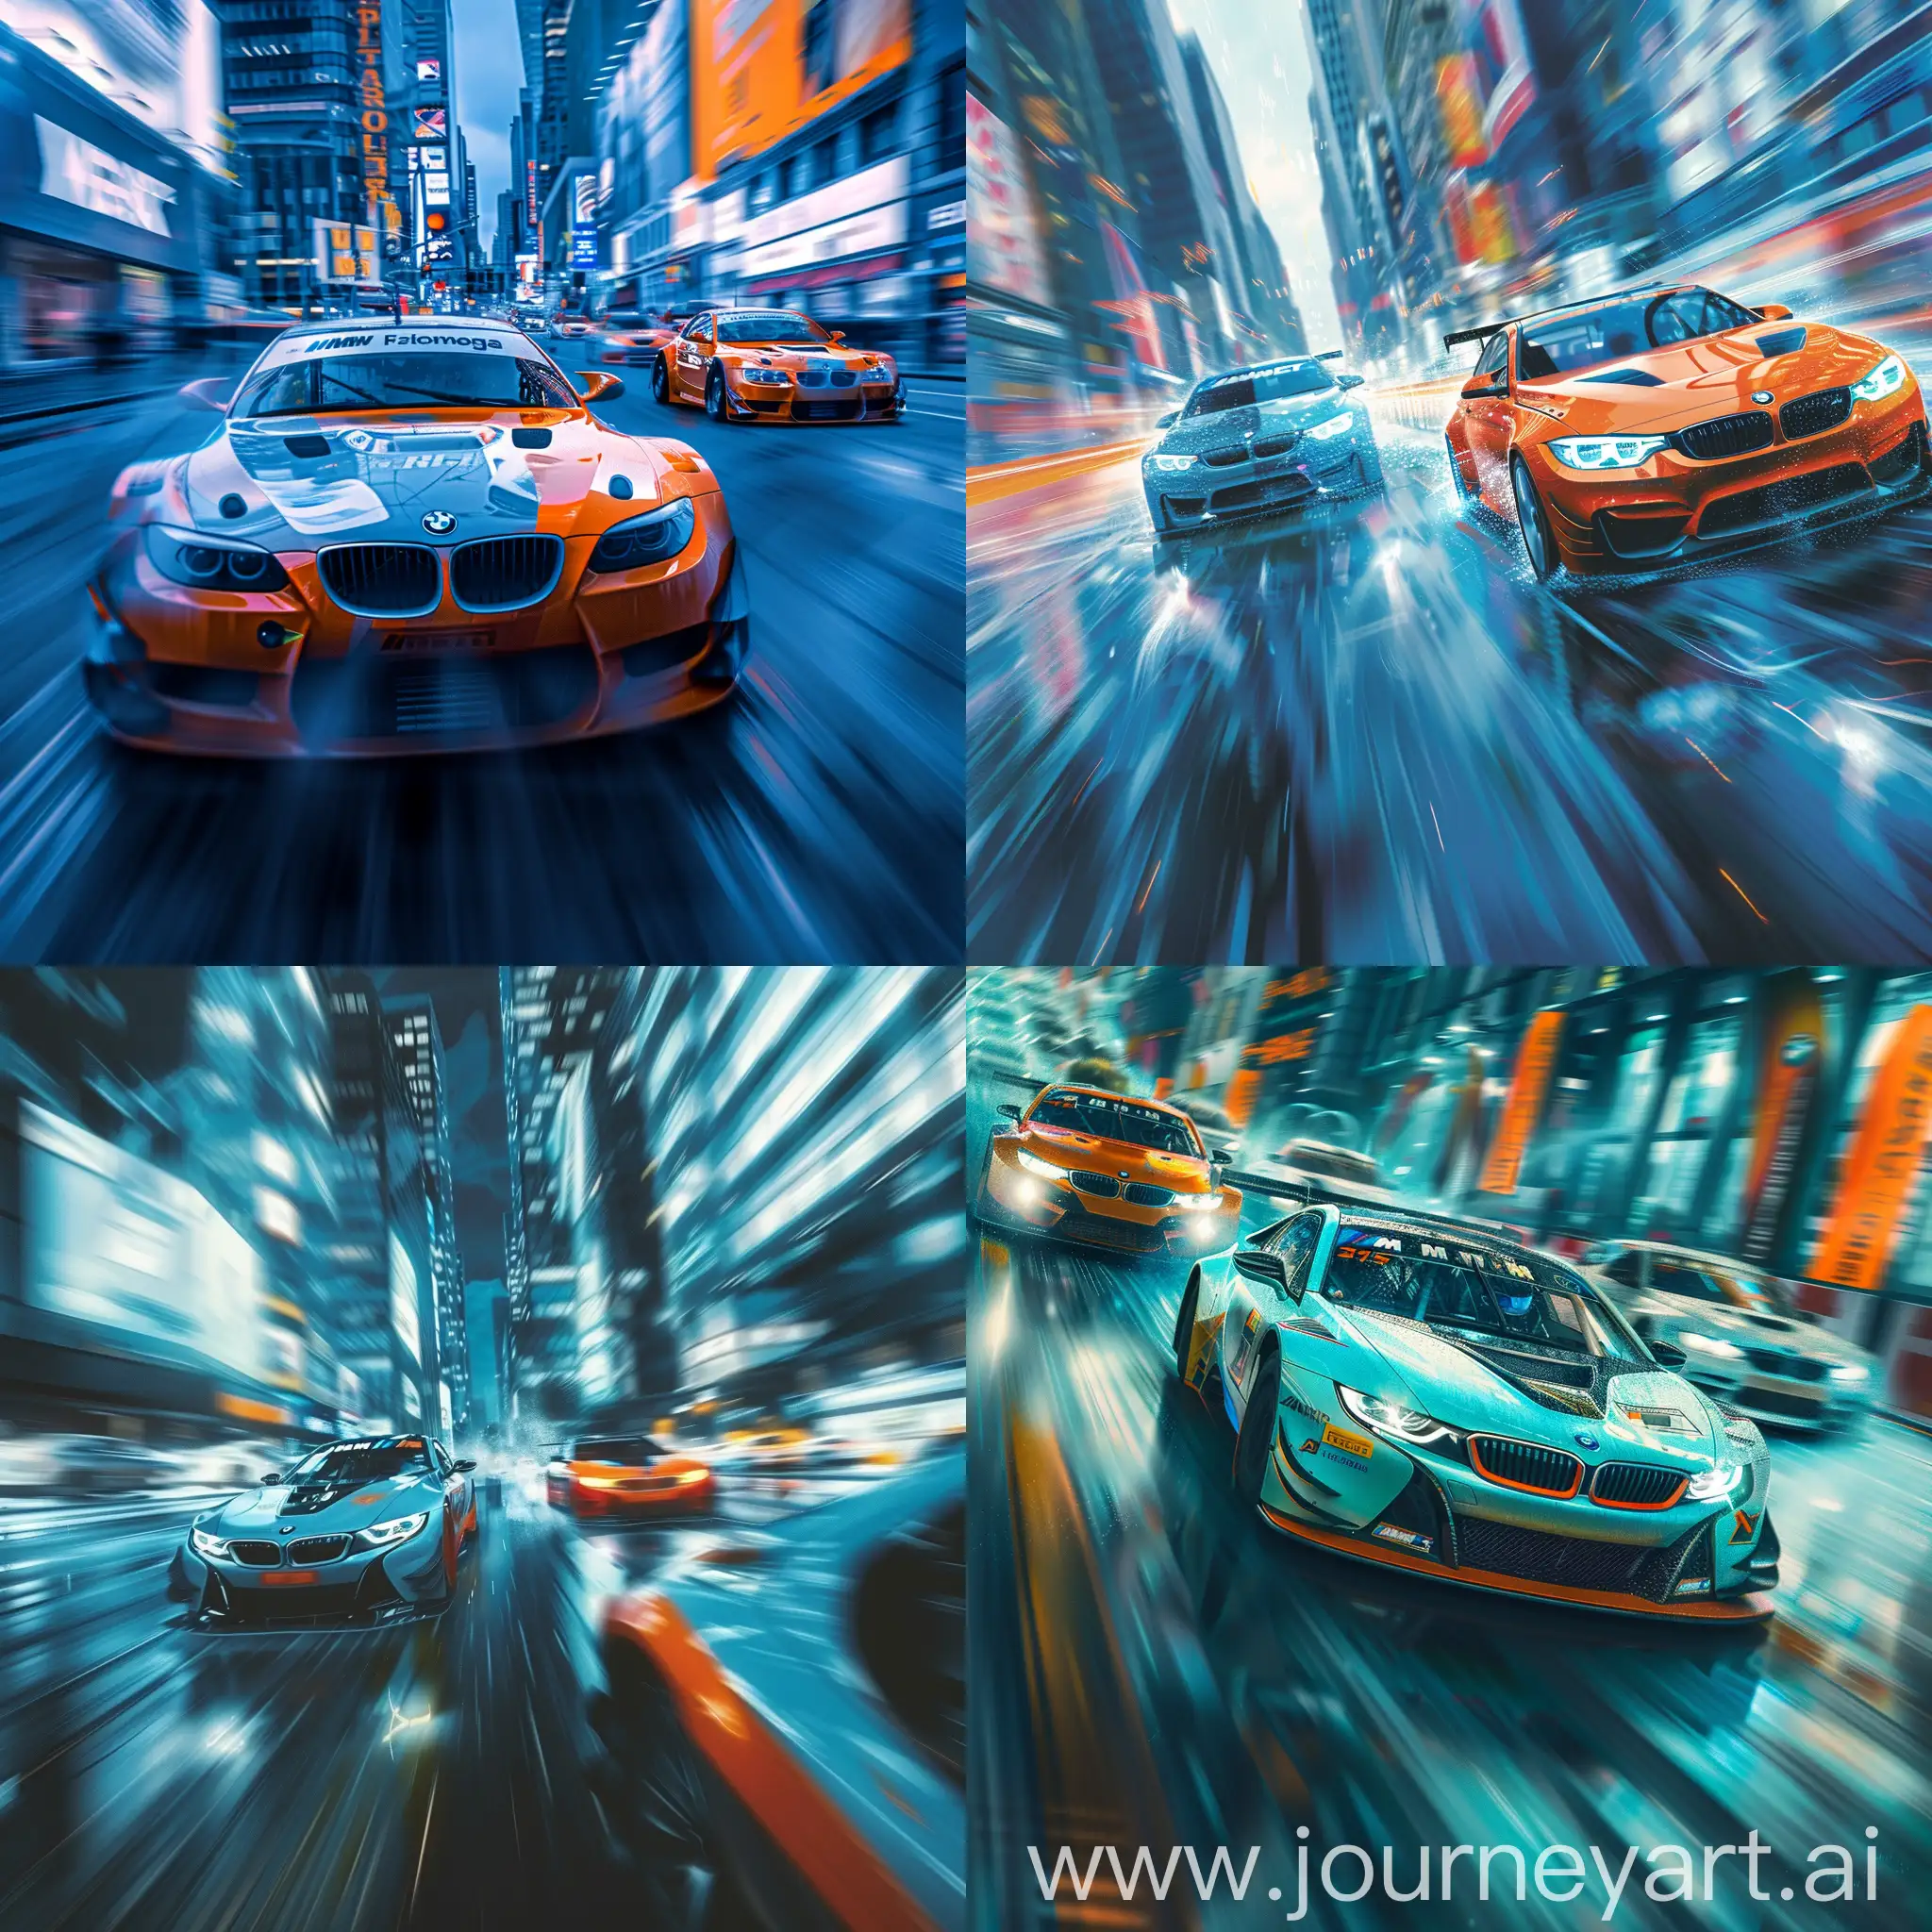 Dynamic-BMW-Street-Racing-in-Metropolis-Speed-and-Technology-in-Cool-Blues-and-Hot-Oranges